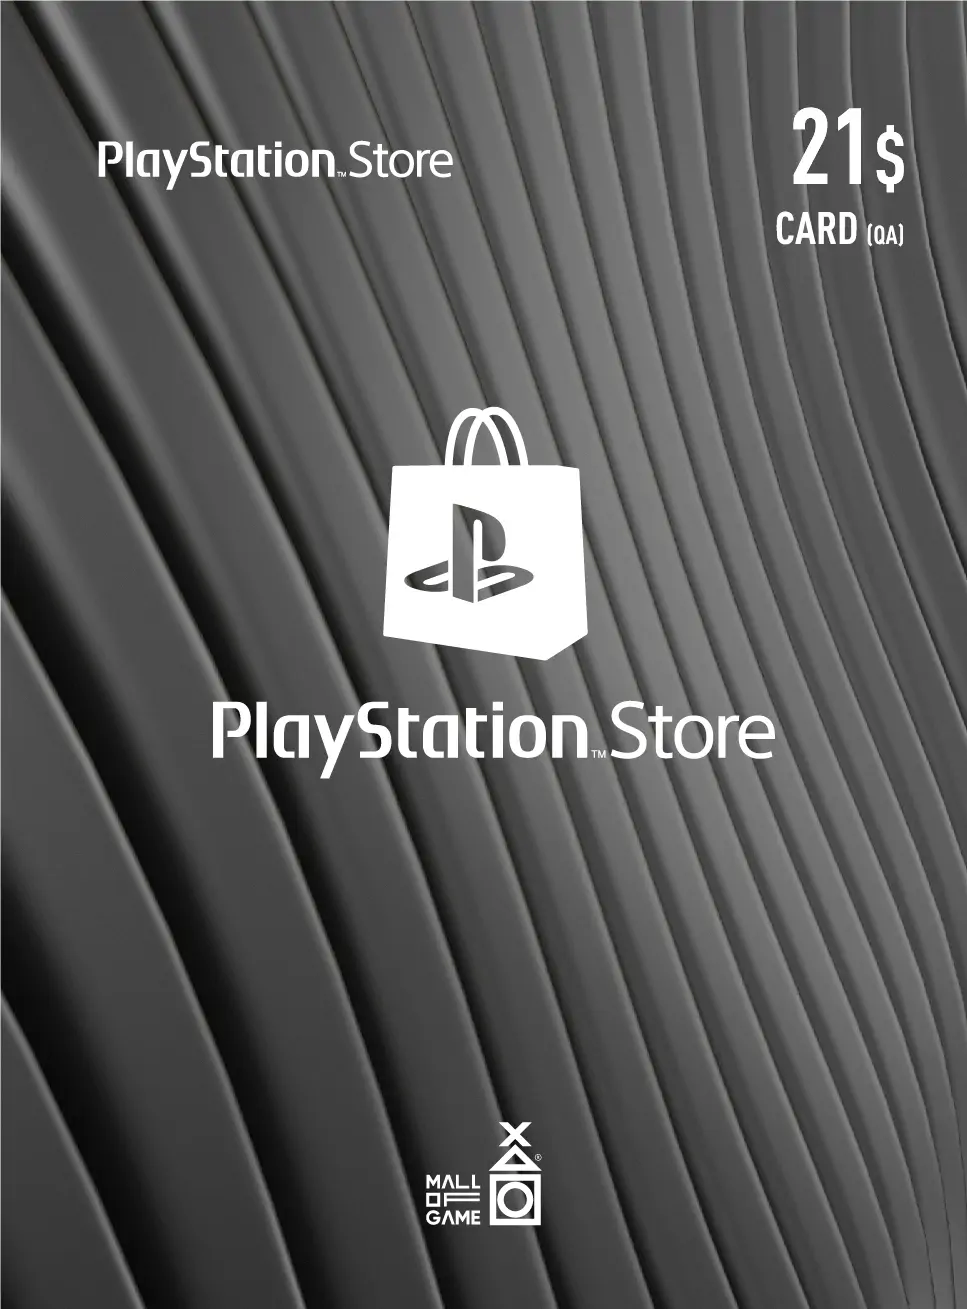 PlayStation™Store USD21 Gift Cards (QA)